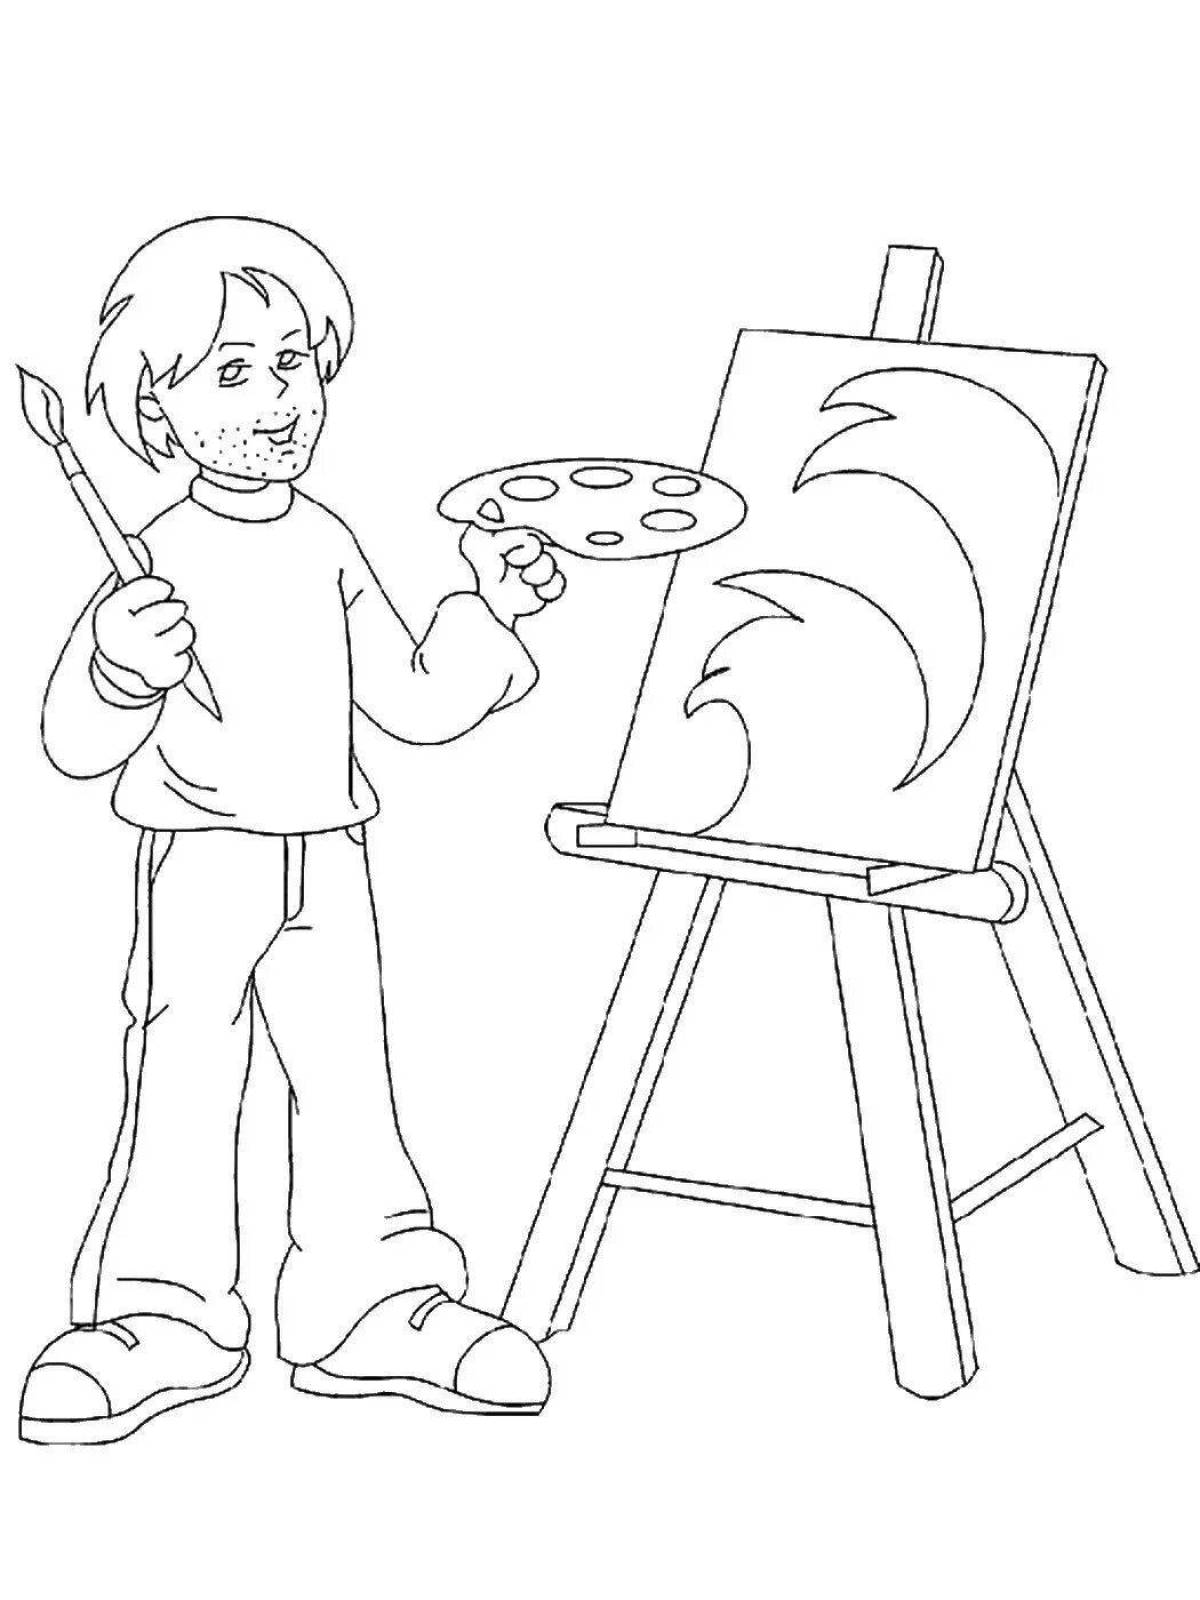 Drawing for kids #2